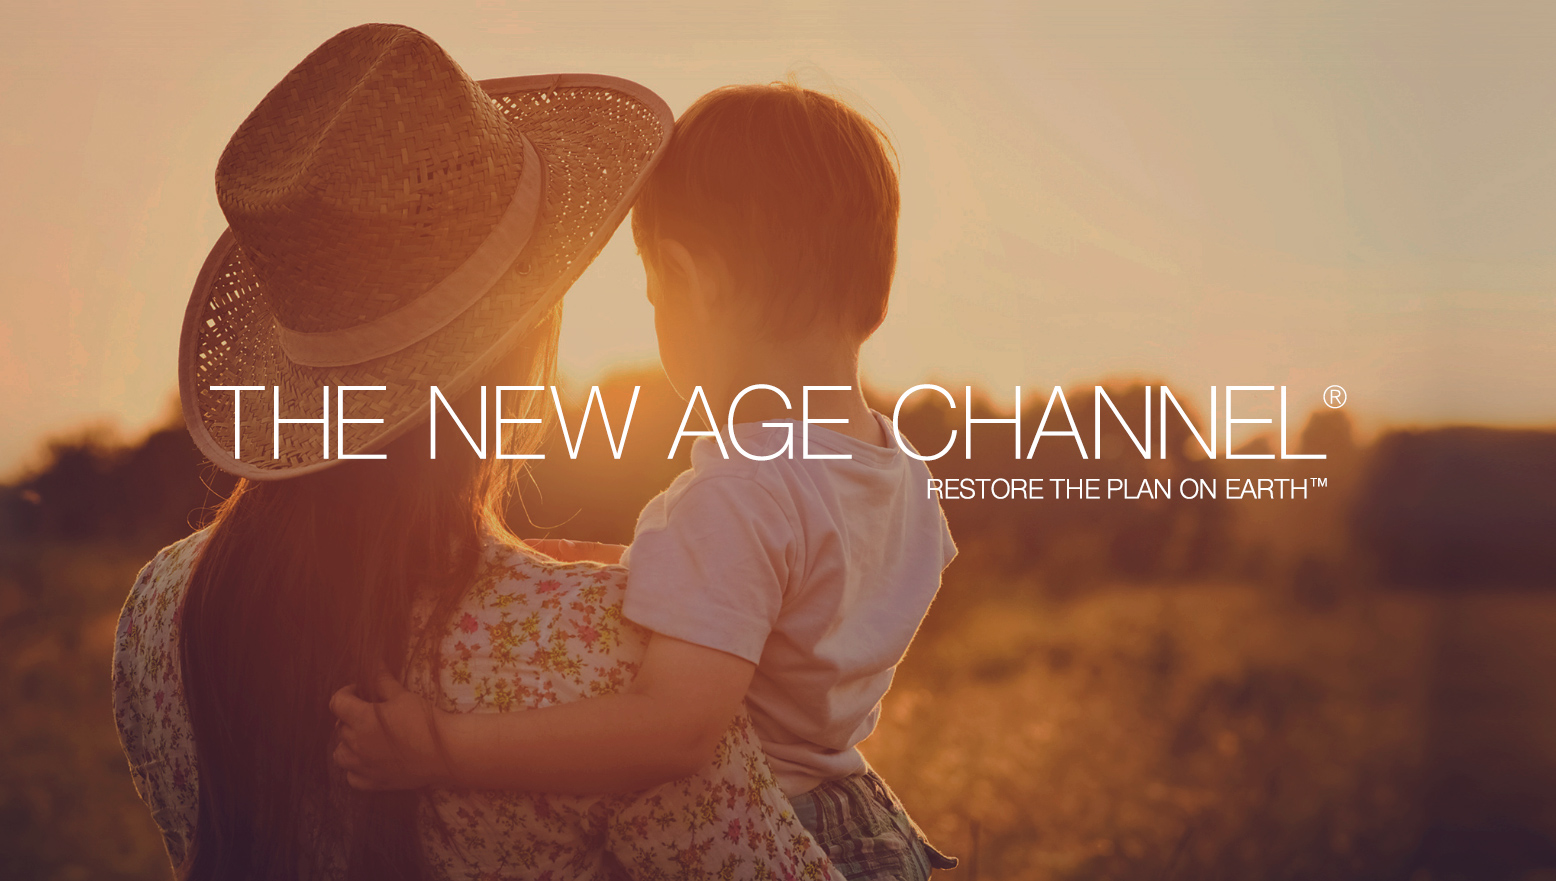 The New Age Channel OTT Network © - All Rights Reserved